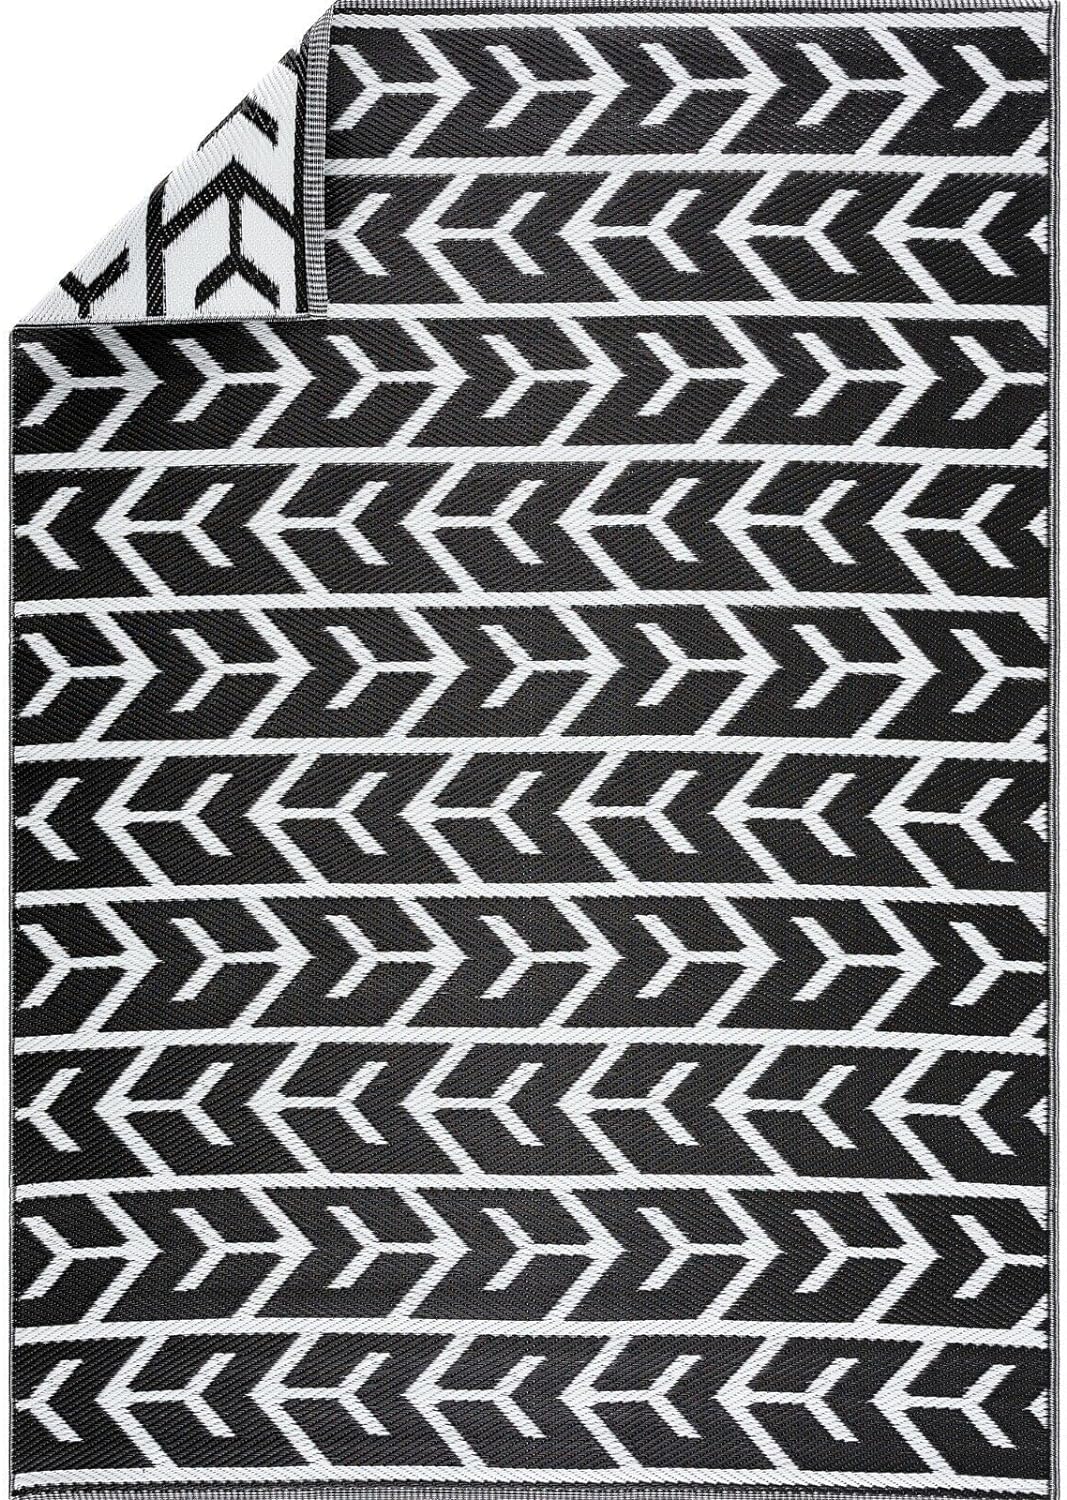 Playa Outdoor Rug - Crease-Free Recycled Plastic Floor Mat for Patio, Camping, Beach, Balcony, Porch, Deck - Weather, Water, Stain, Lightweight, Fade and UV Resistant - Amsterdam- Black & White